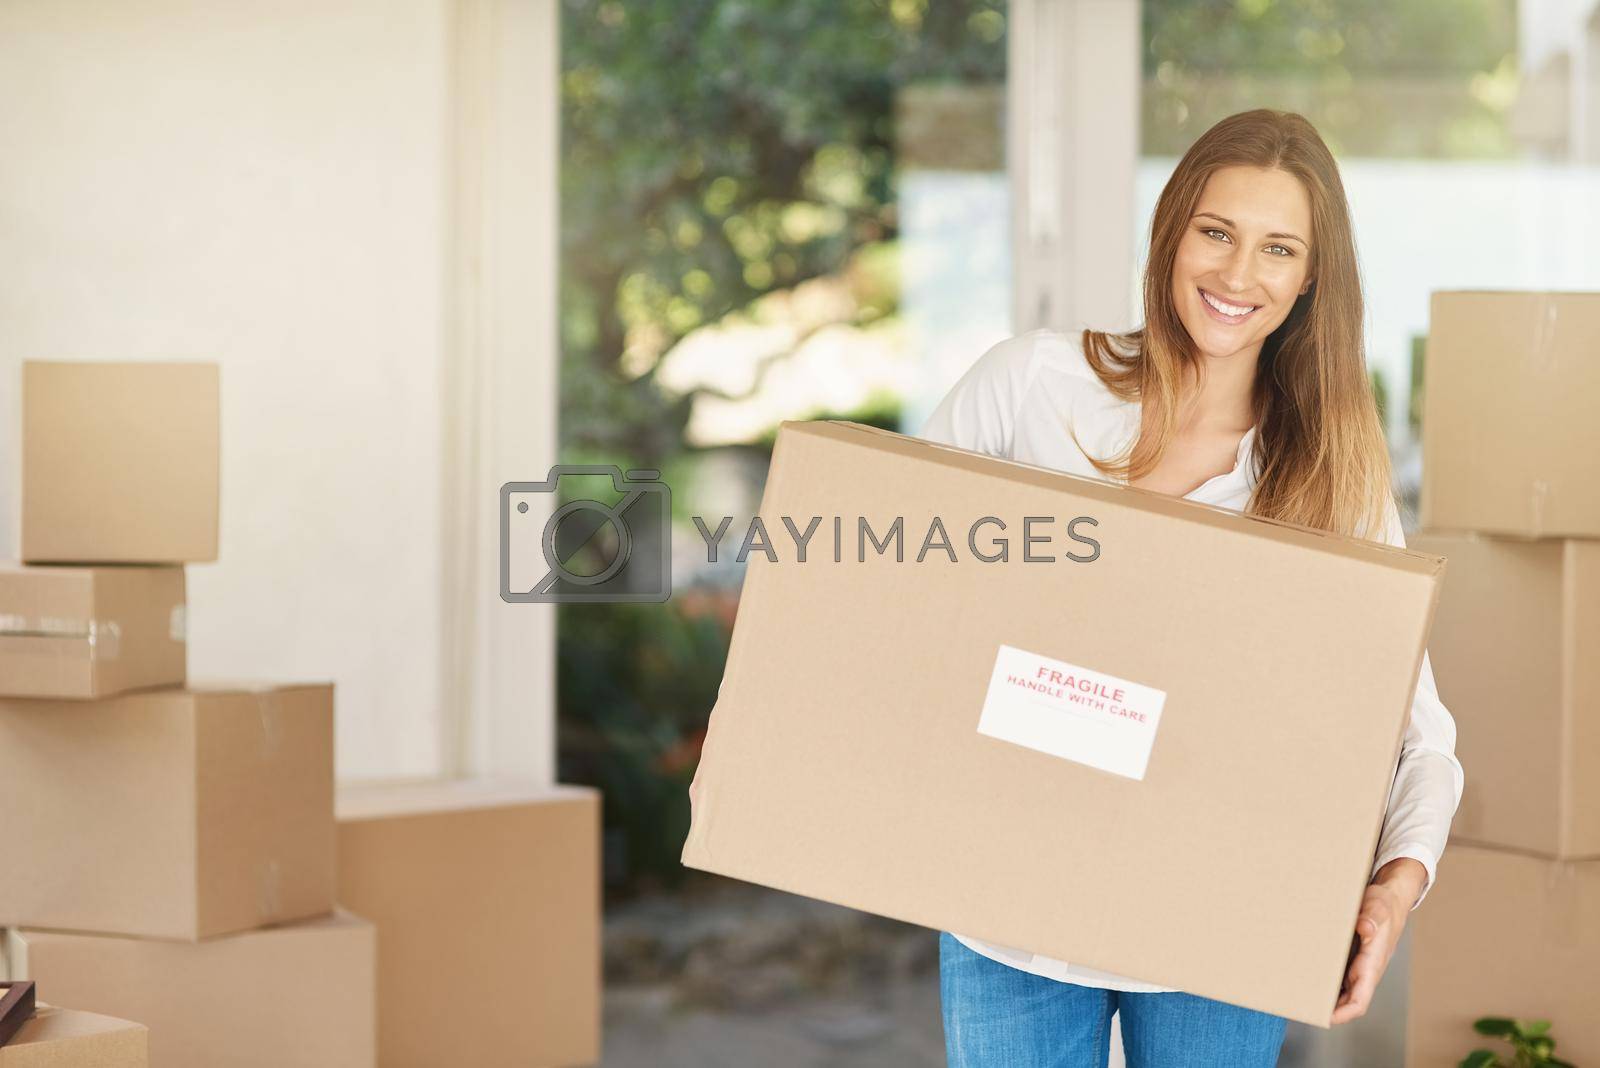 Royalty free image of Heres to a new start. Portrait of a smiling young woman carrying a box on moving into her new house. by YuriArcurs